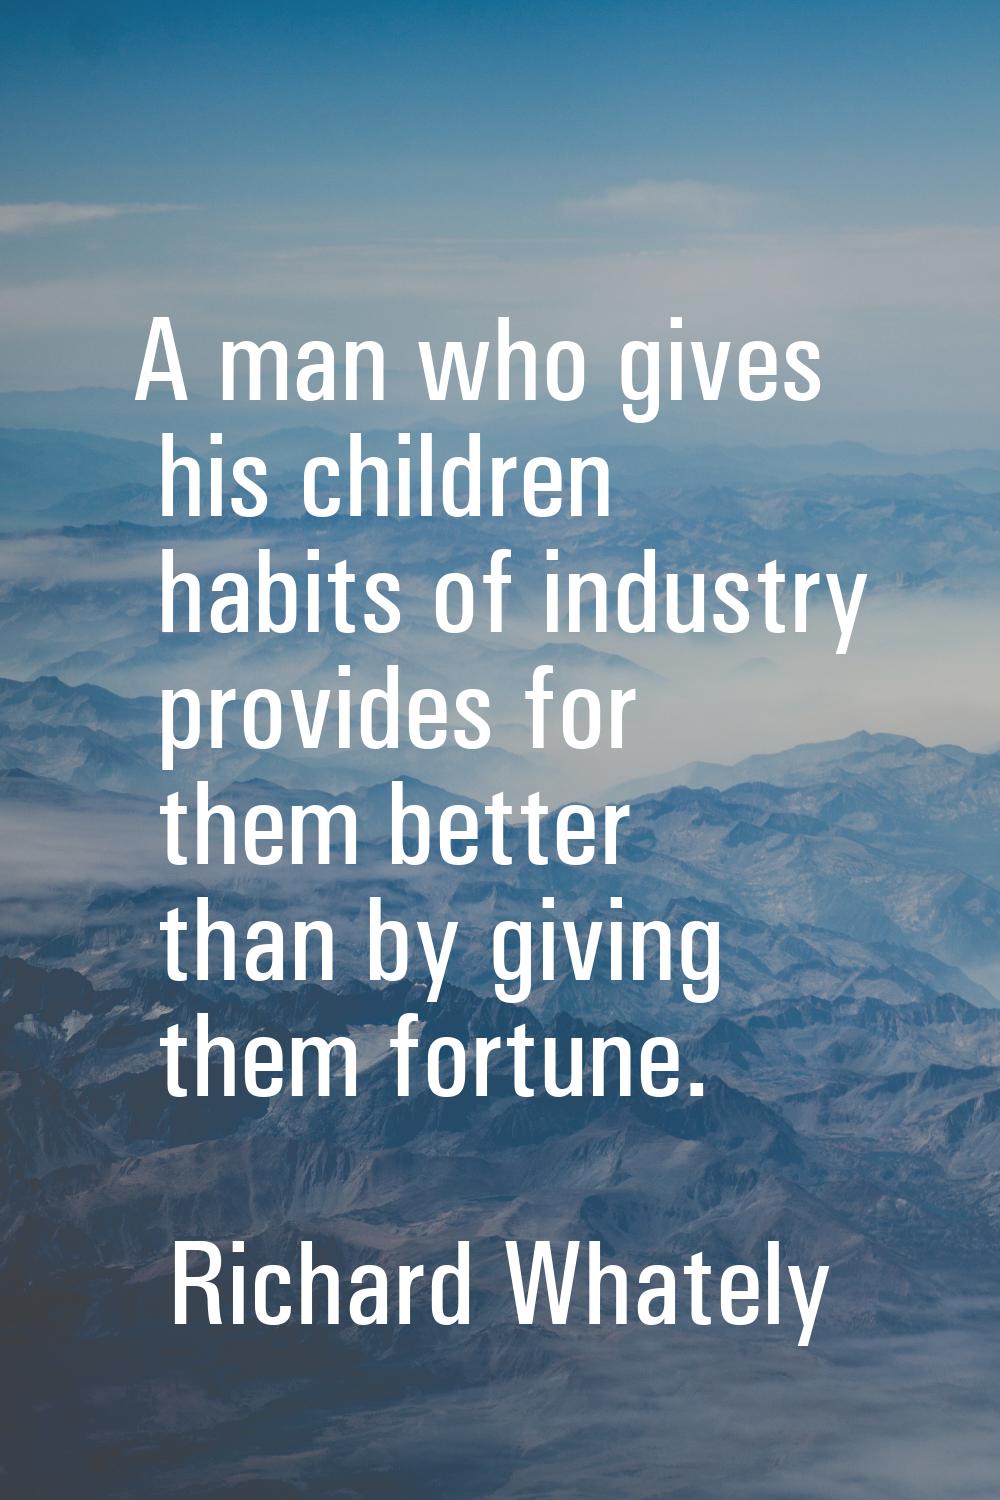 A man who gives his children habits of industry provides for them better than by giving them fortun